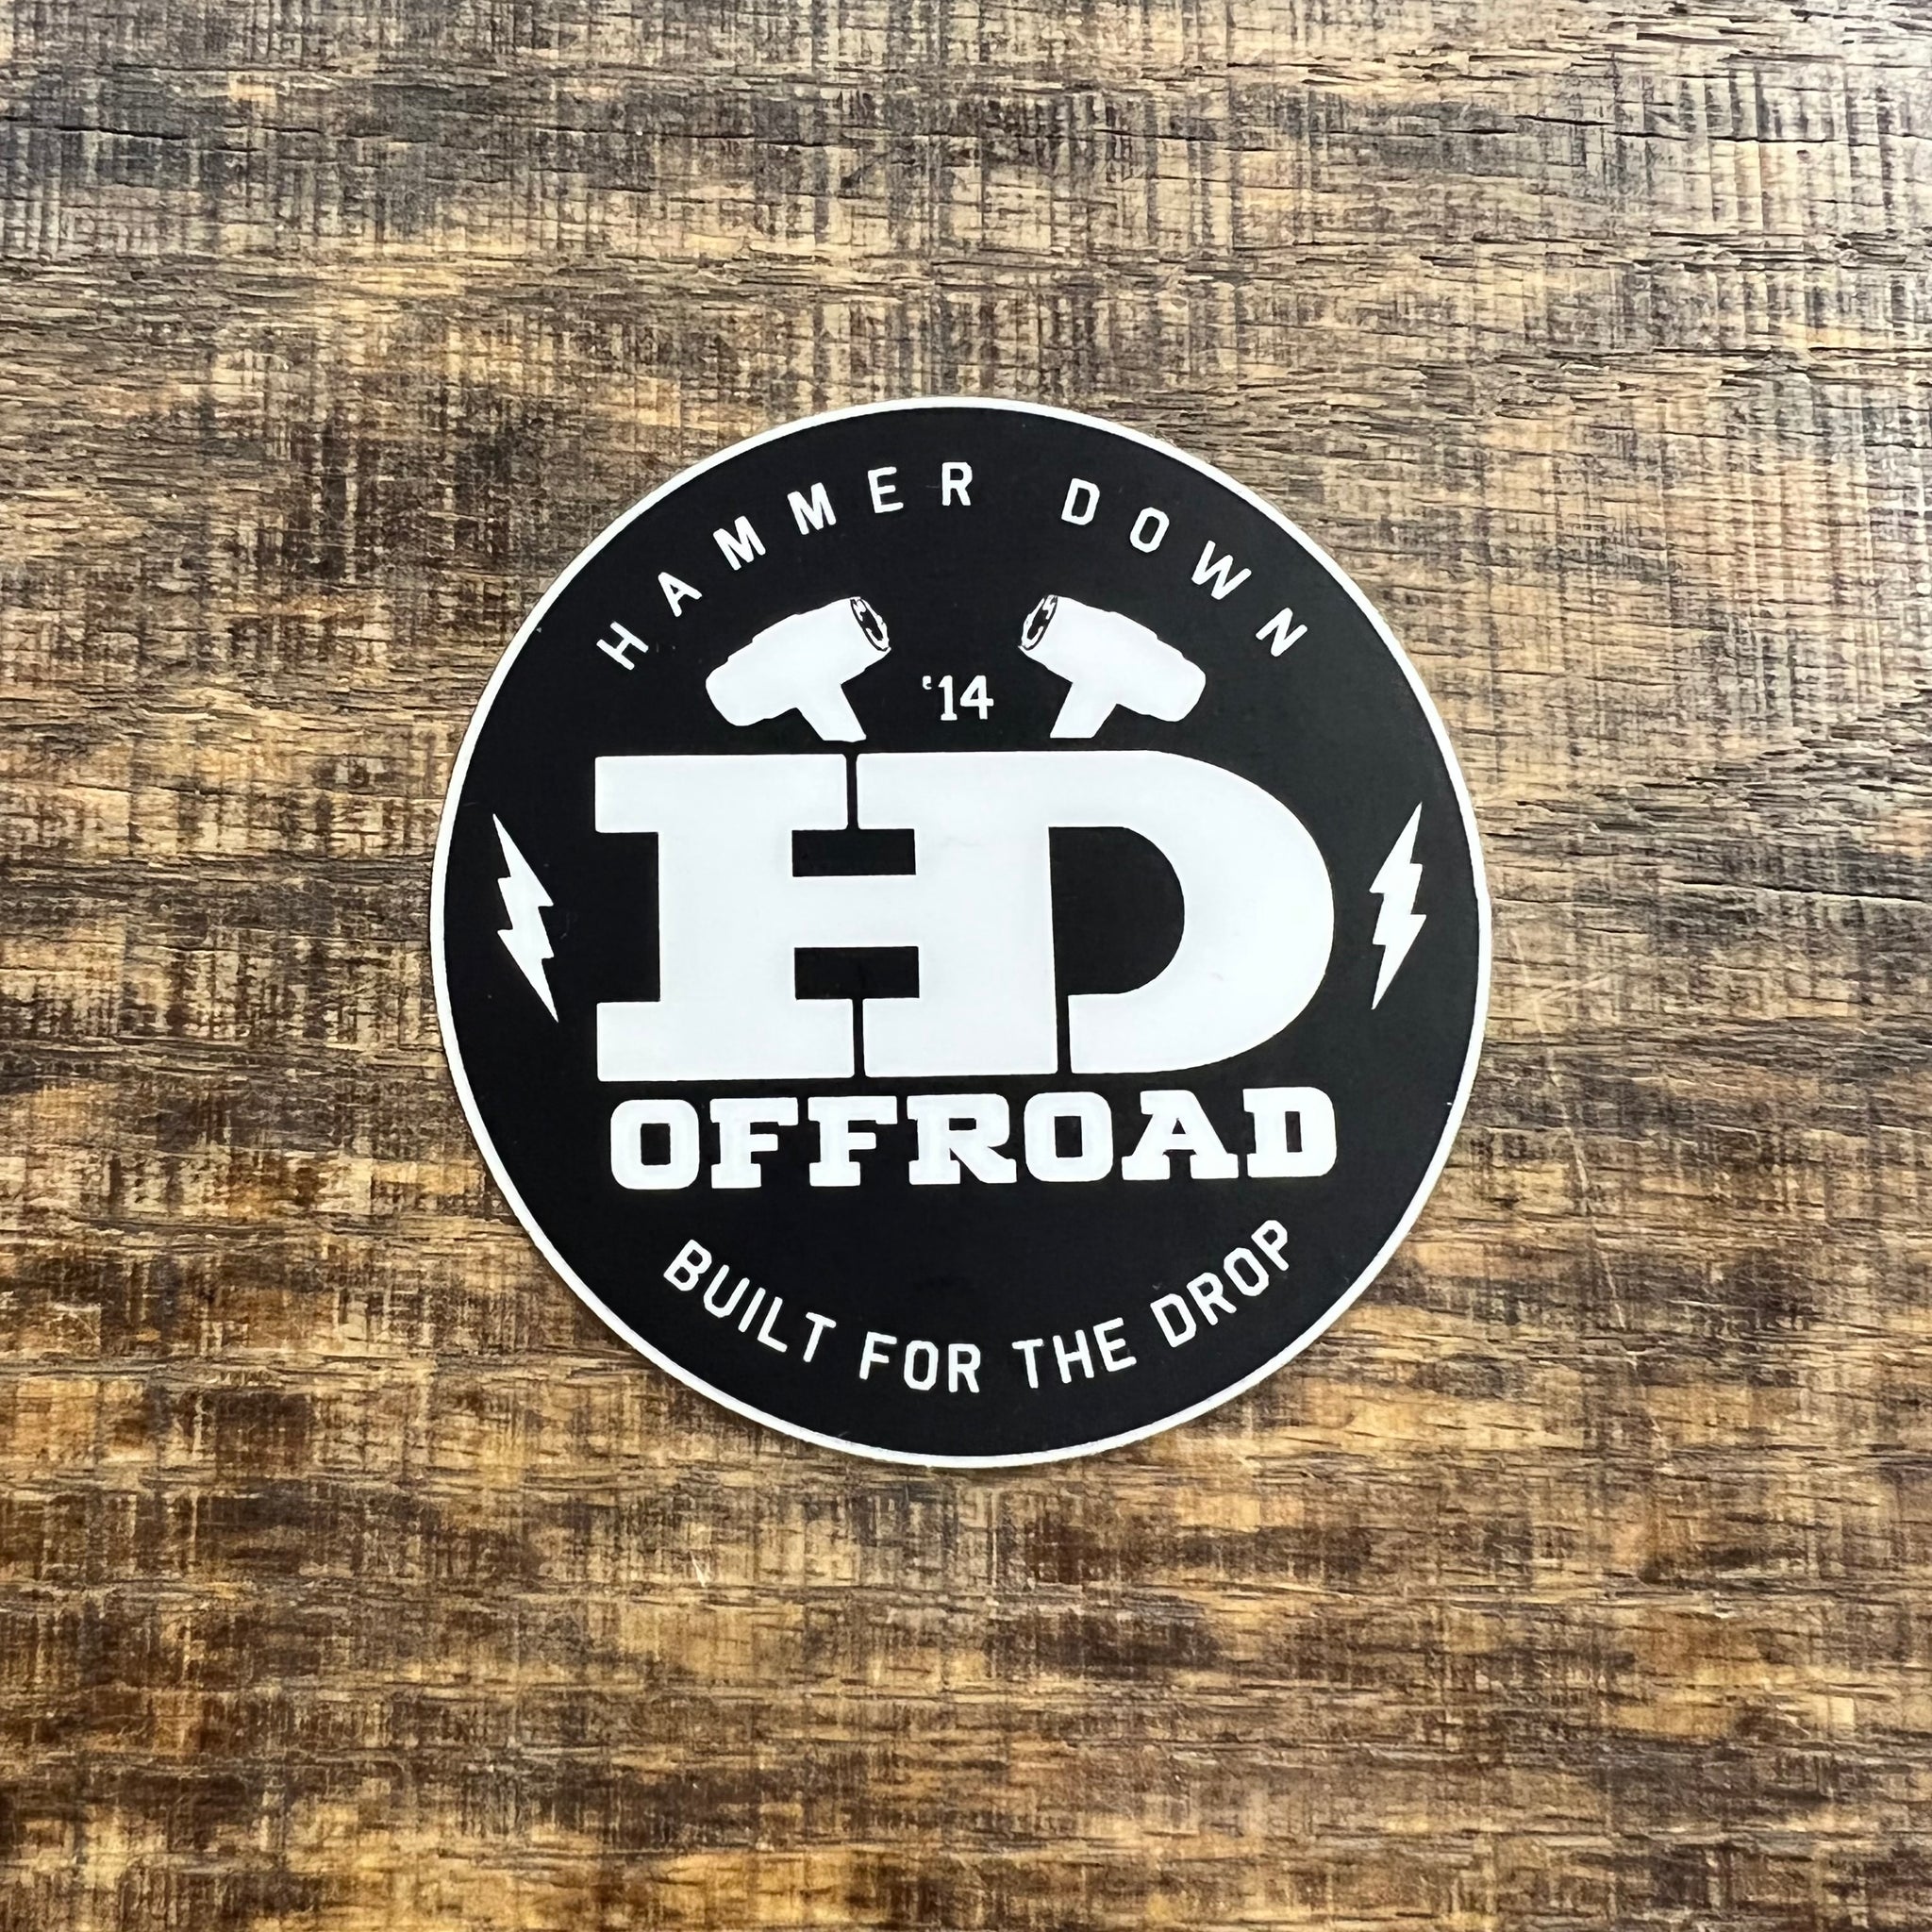 Hammer Down "Off Road" Sticker - Black And White